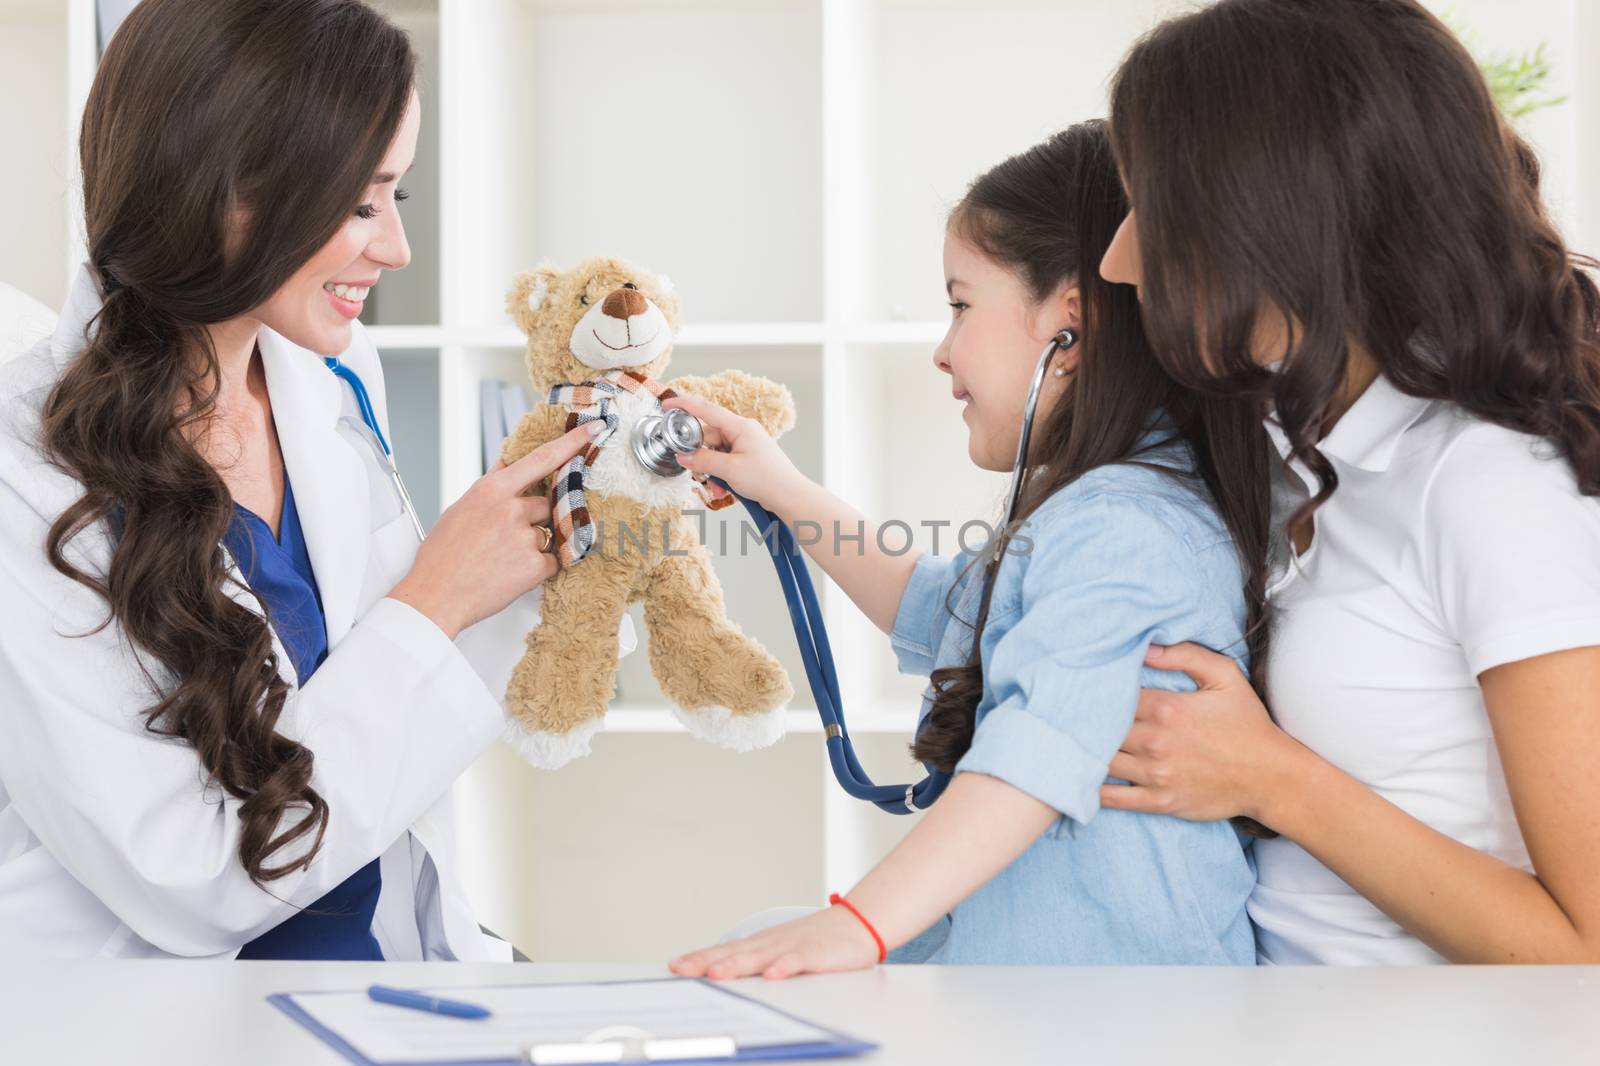 Cute small child patient pretending to be doctor, holding teddy bear toy at meeting with general practitioner. Friendly nurse showing how stethoscope works to smiling little girl at checkup in clinic.